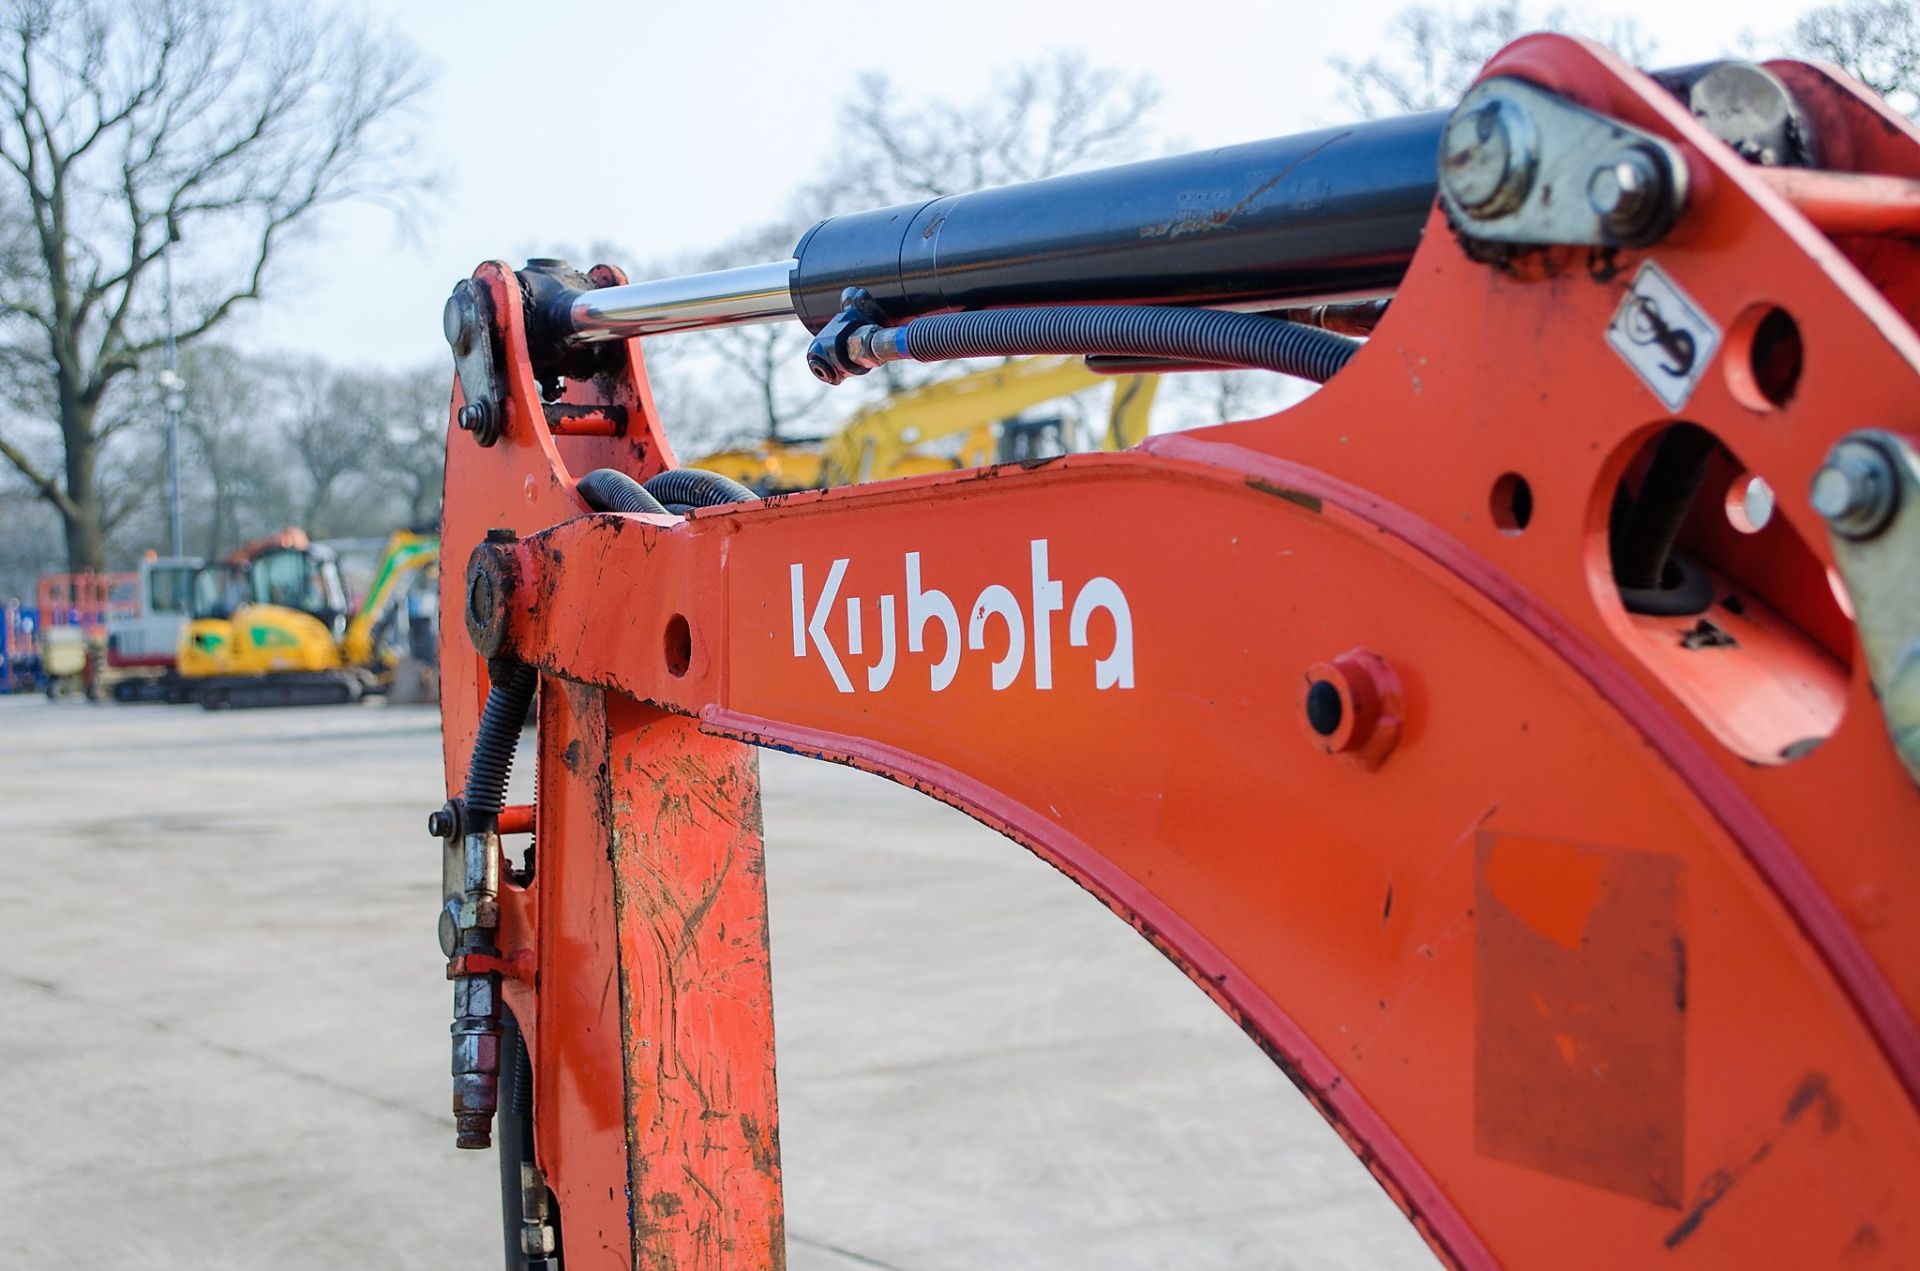 Kubota KX015-4 1.5 tonne rubber tracked excavator Year: 2014 S/N: 58181 Recorded Hours: 1616 - Image 14 of 21